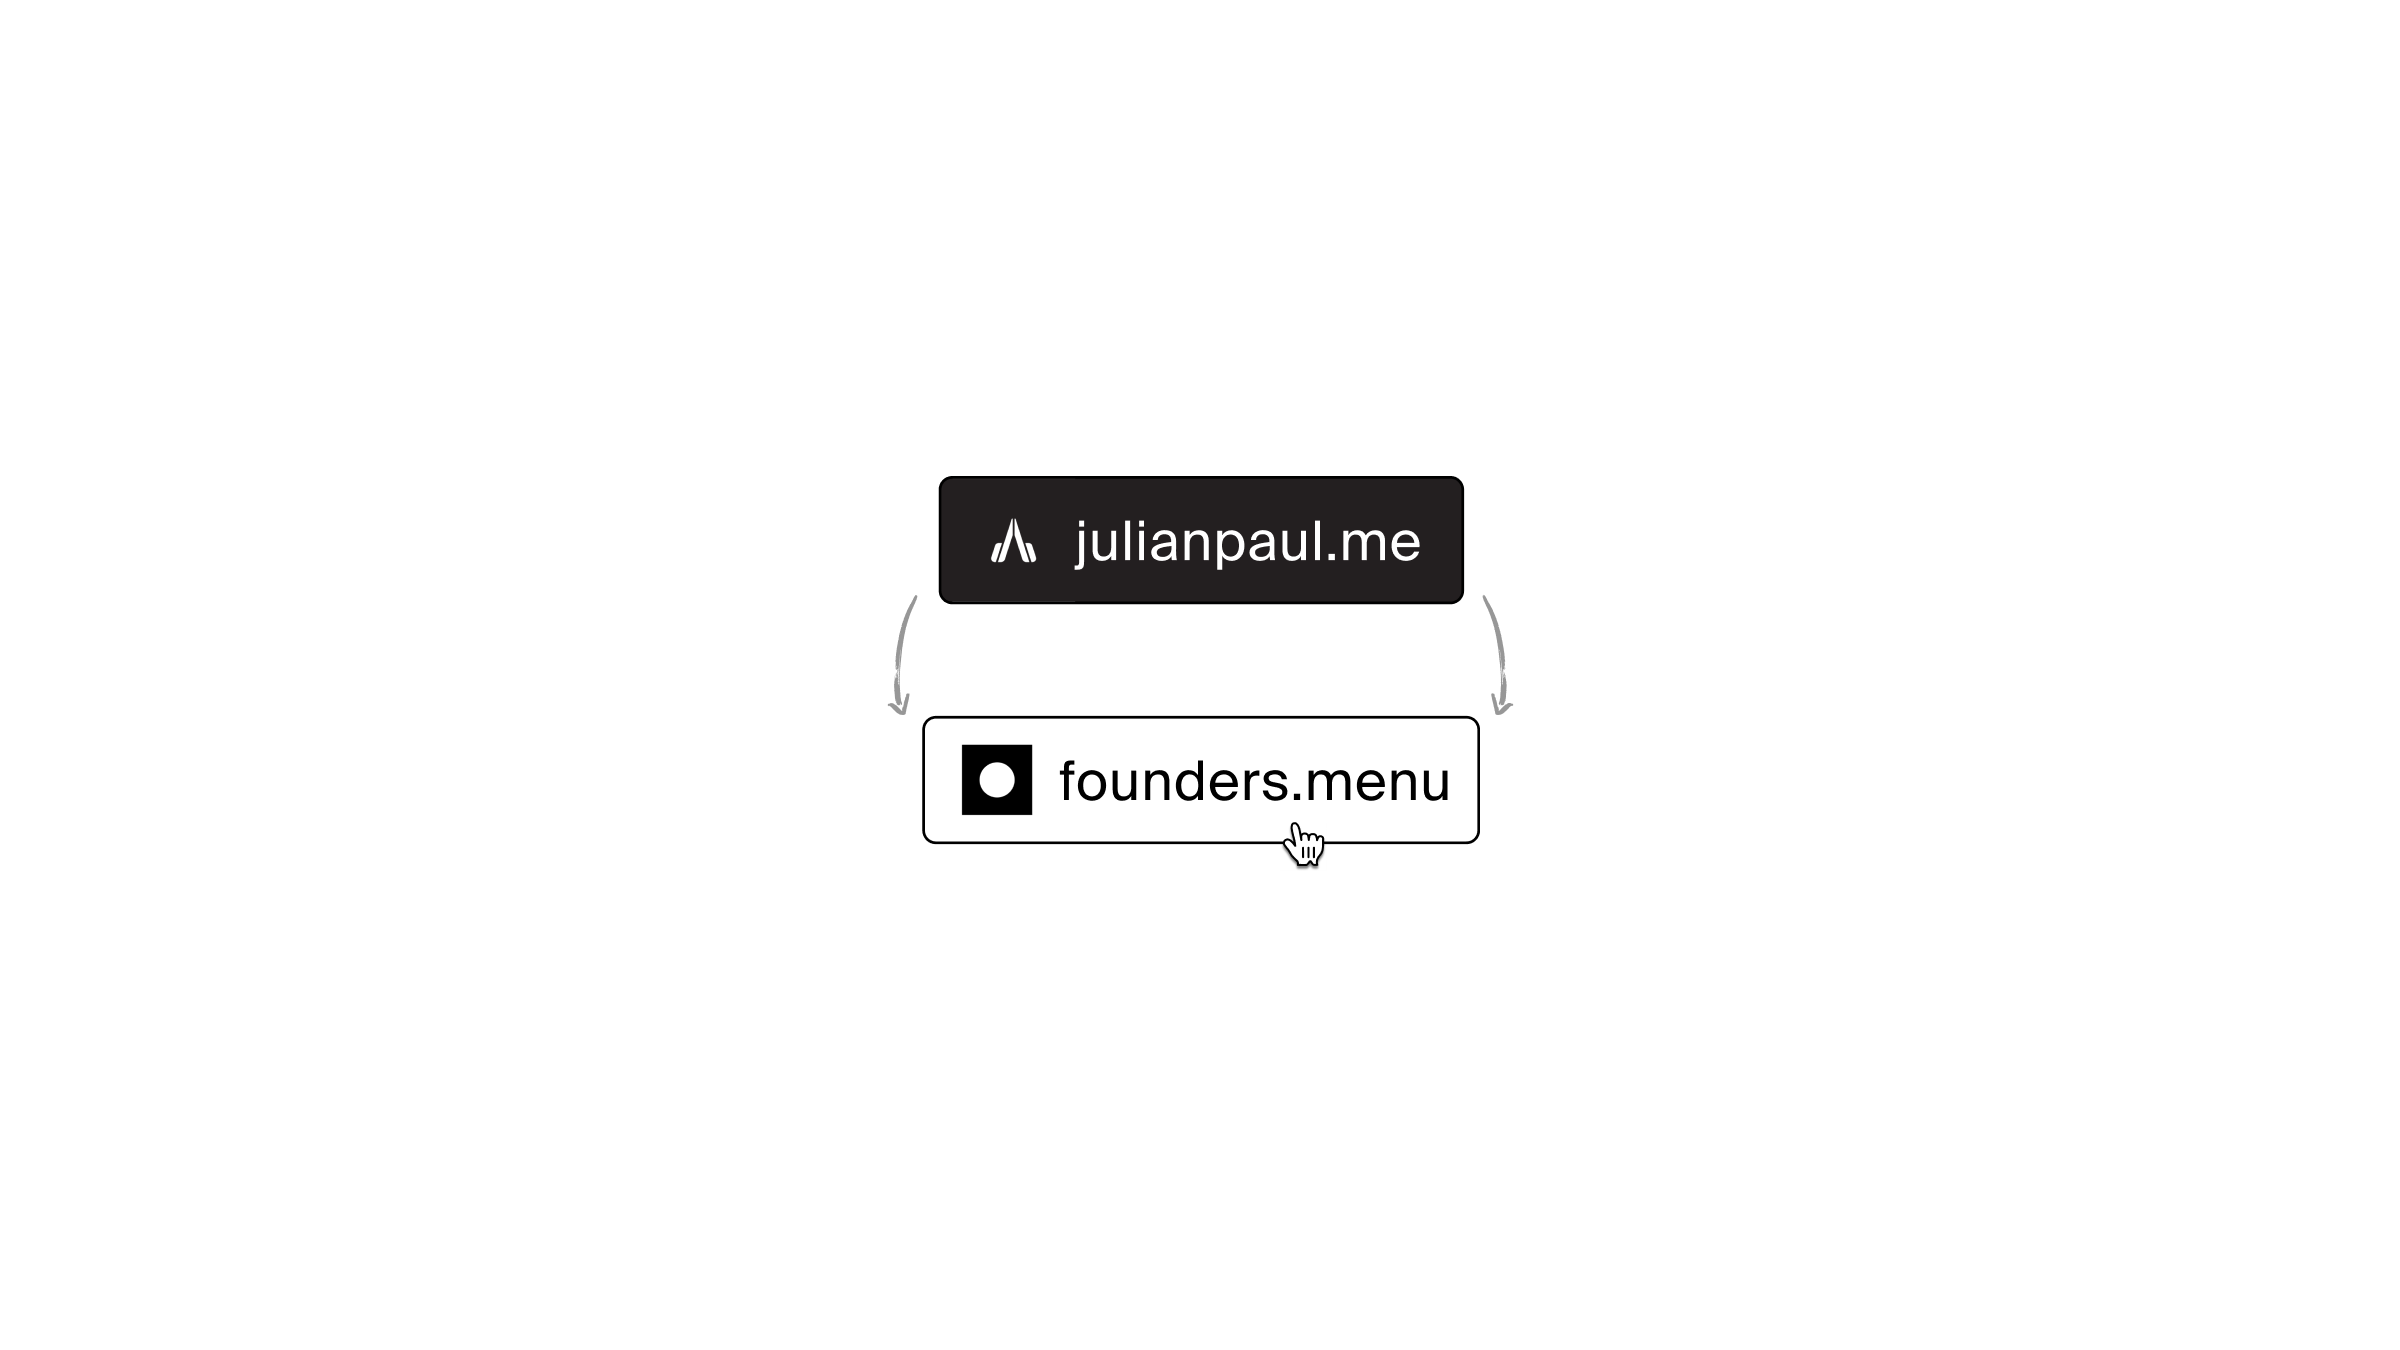 founders.menu rebranding from bootstrap.supply